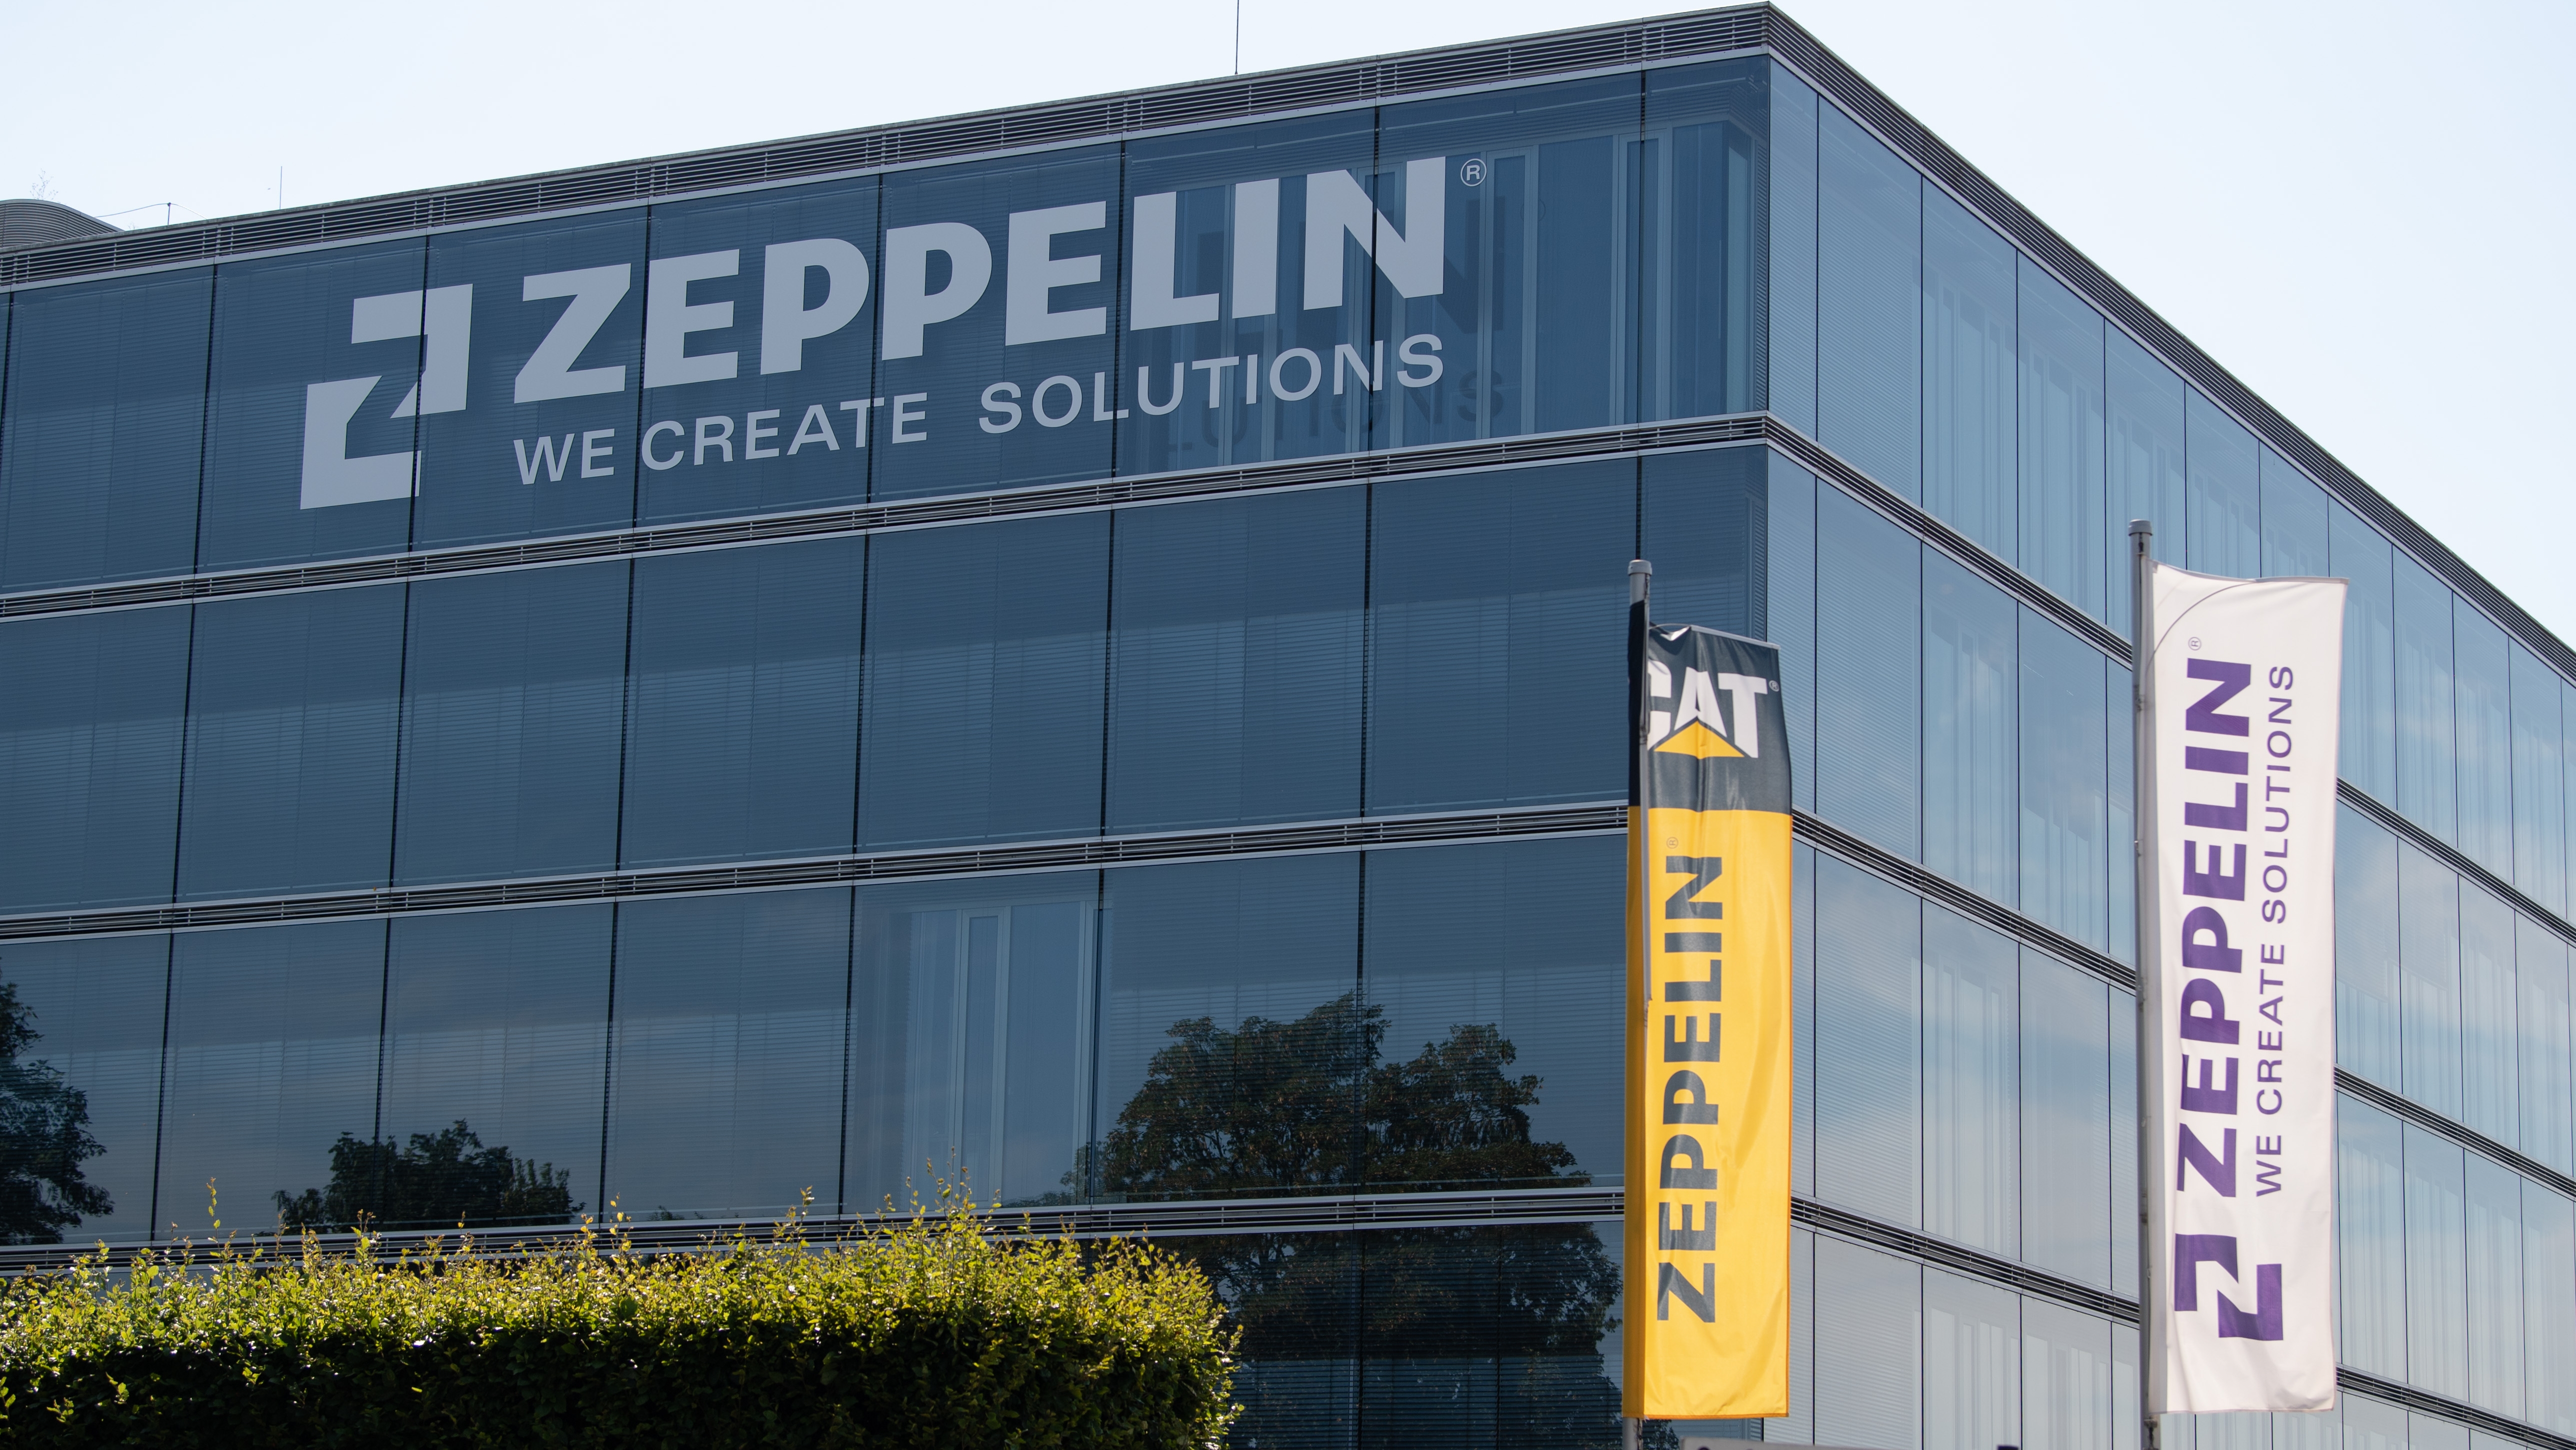 Zeppelin Group appoints new member of the Group Management Board